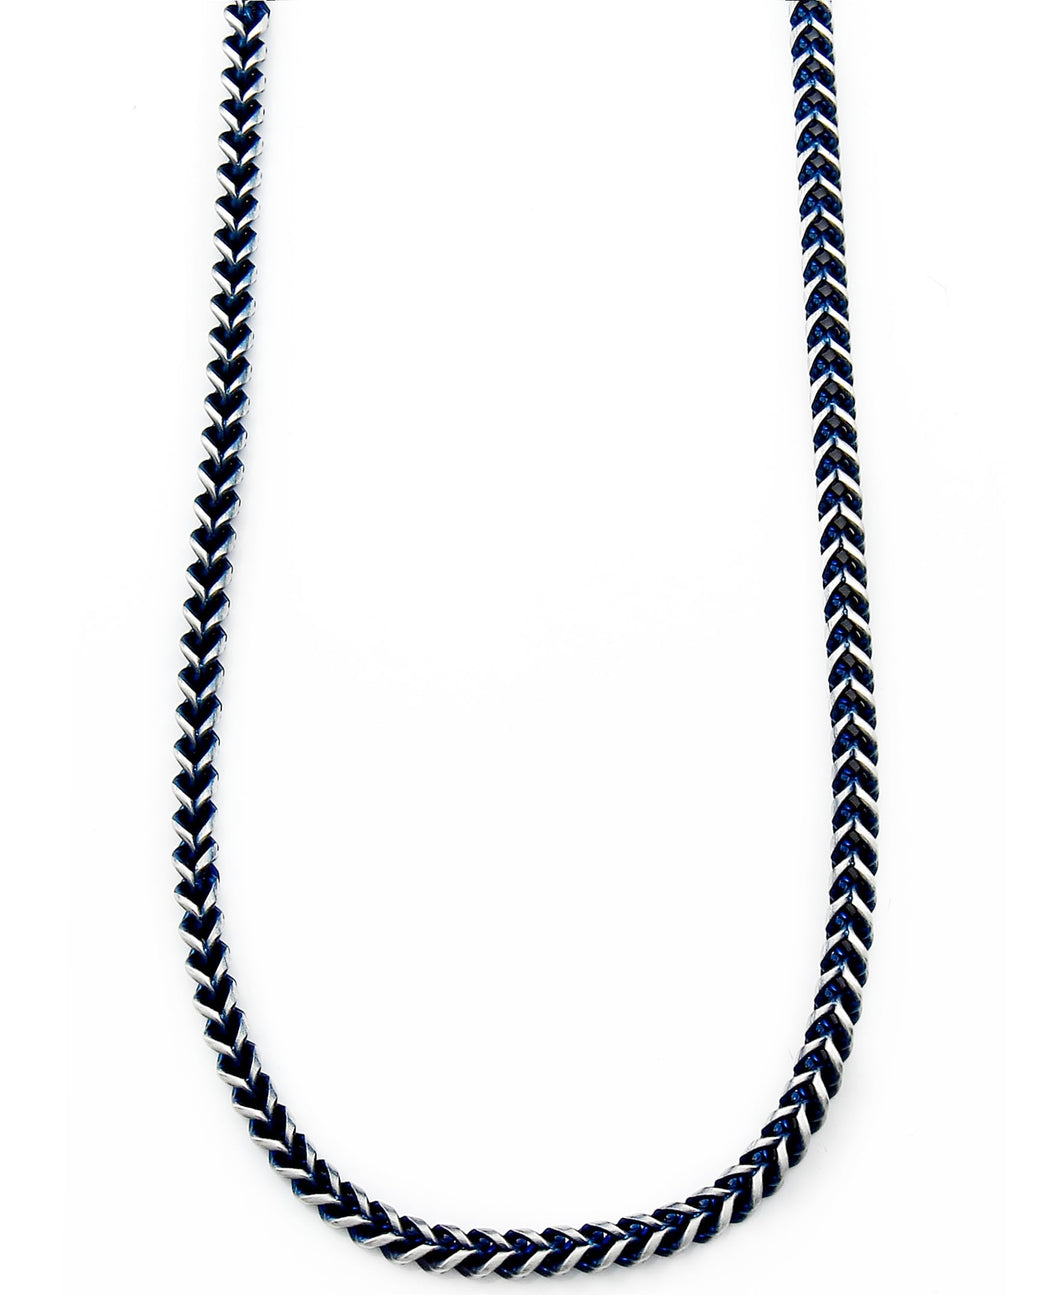 Sutton Stainless Steel Blue-Tone Chain Necklace